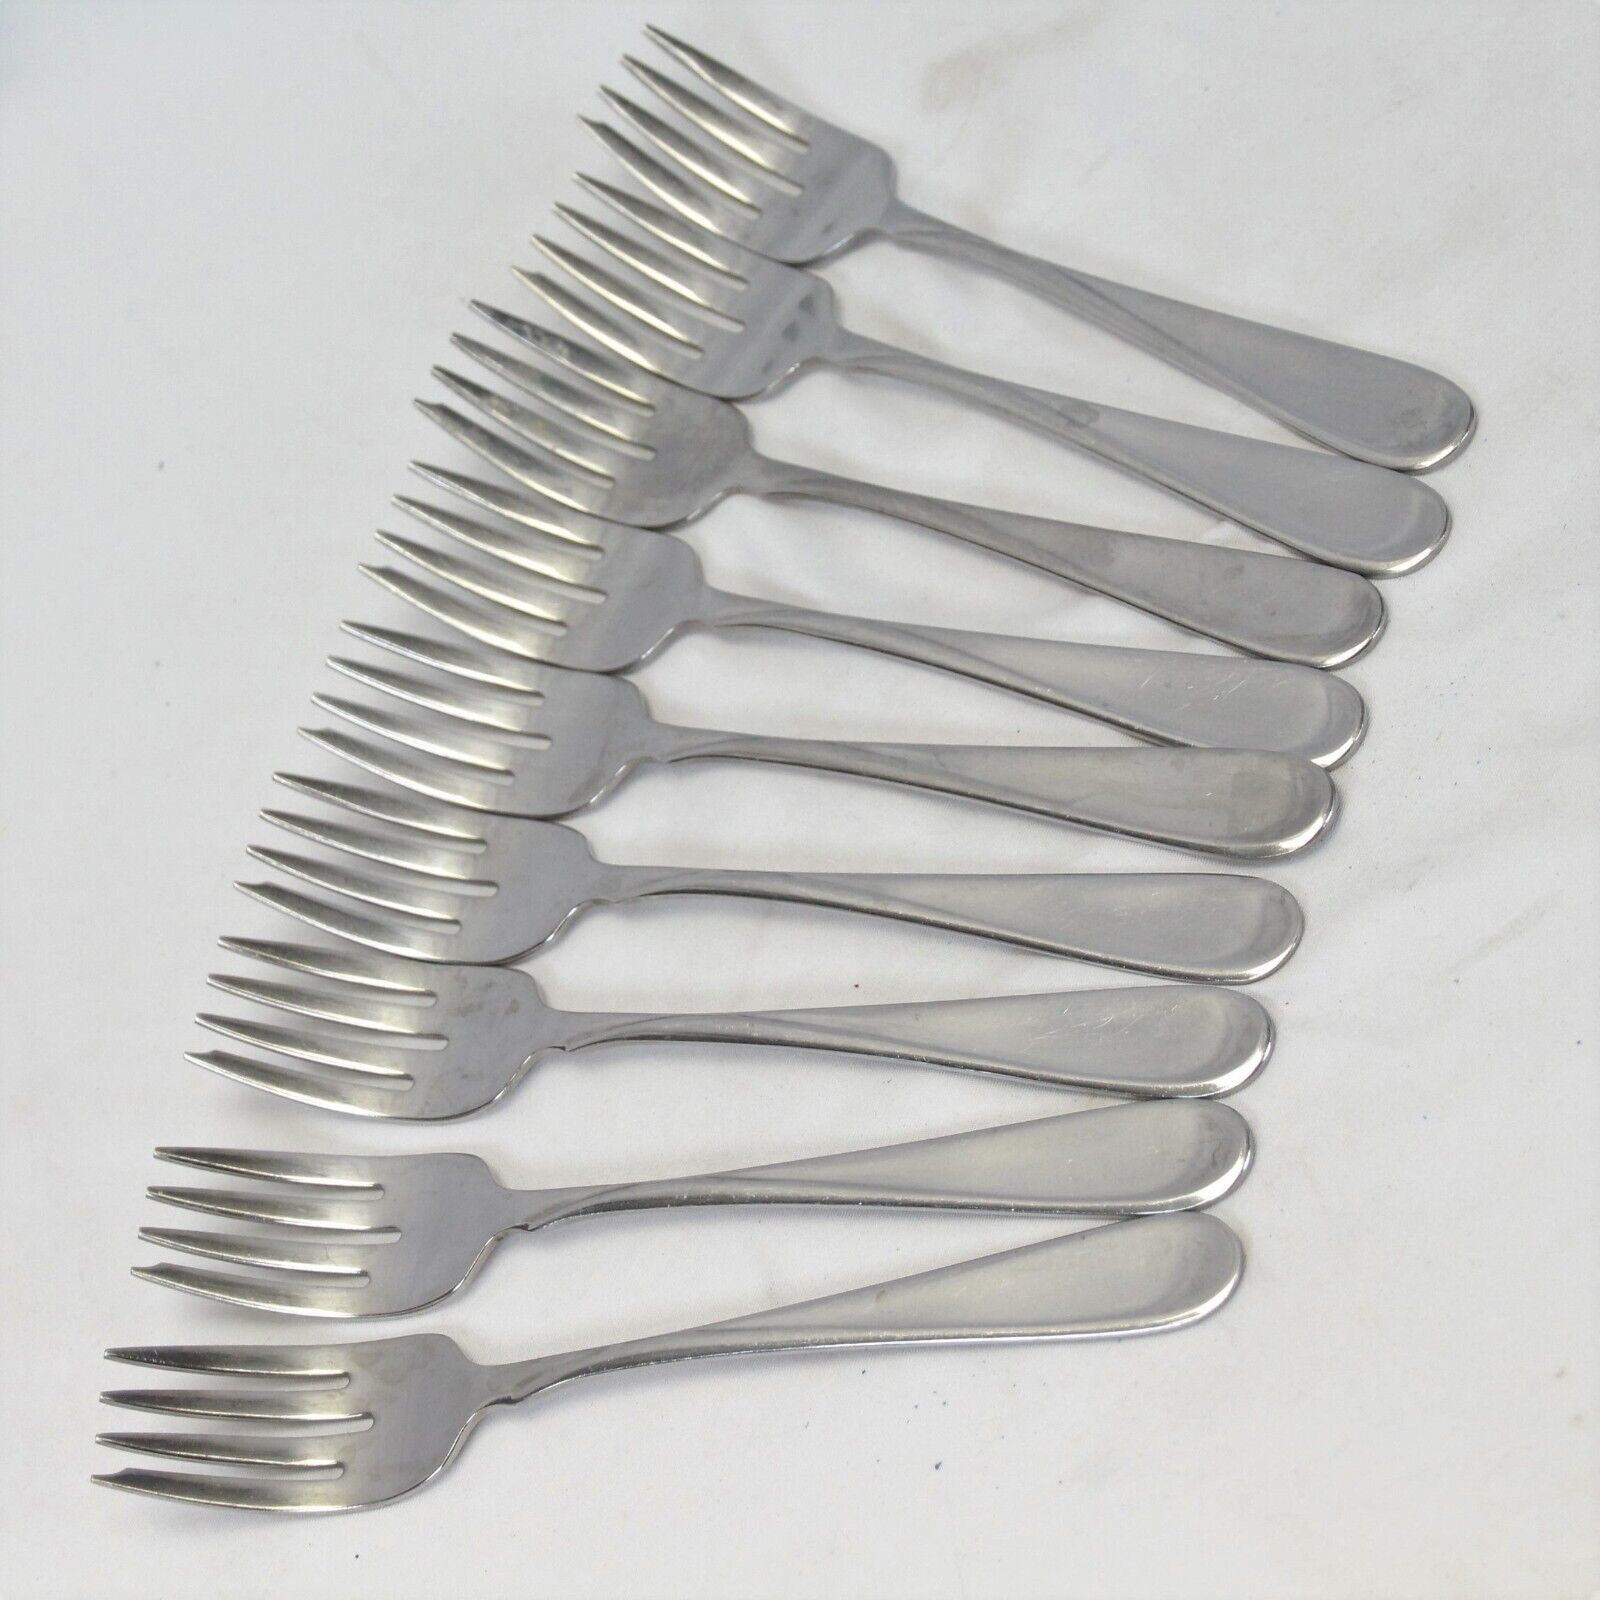 Primary image for Oneida Flight Reliance Salad Forks Glossy 6 5/8" Lot of 9